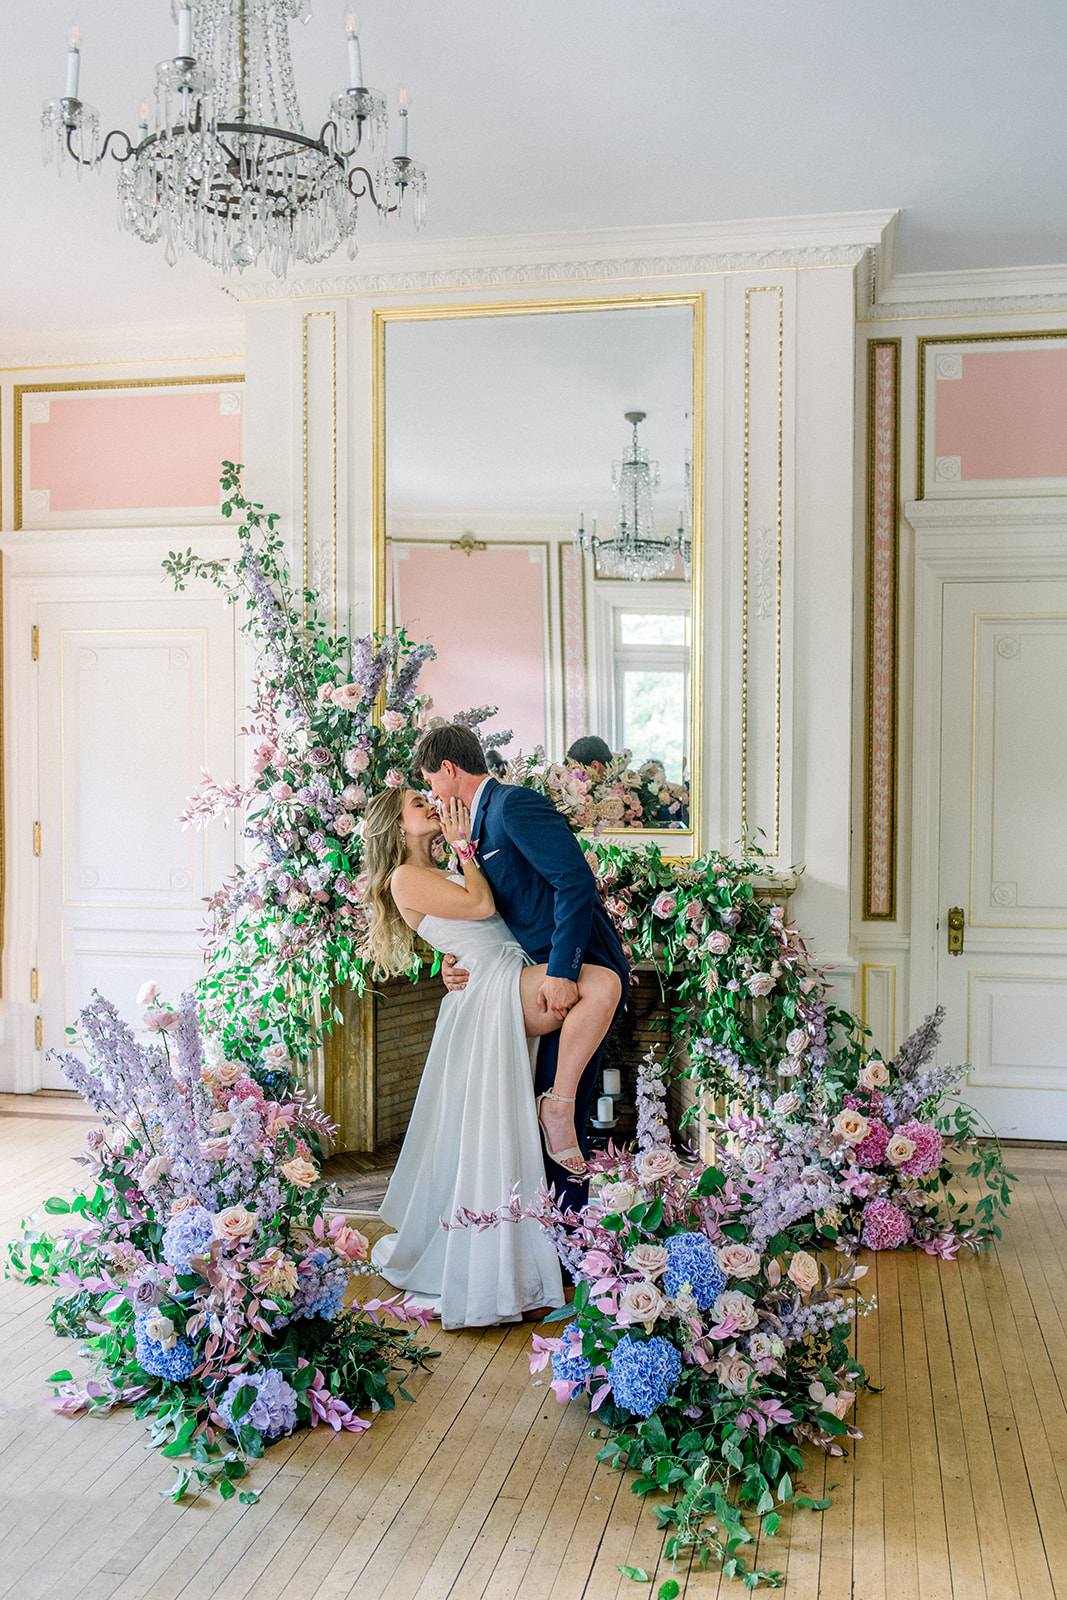 Romantic embrace of bride and groom amidst lush florals at a luxury Cairnwood Estate wedding.